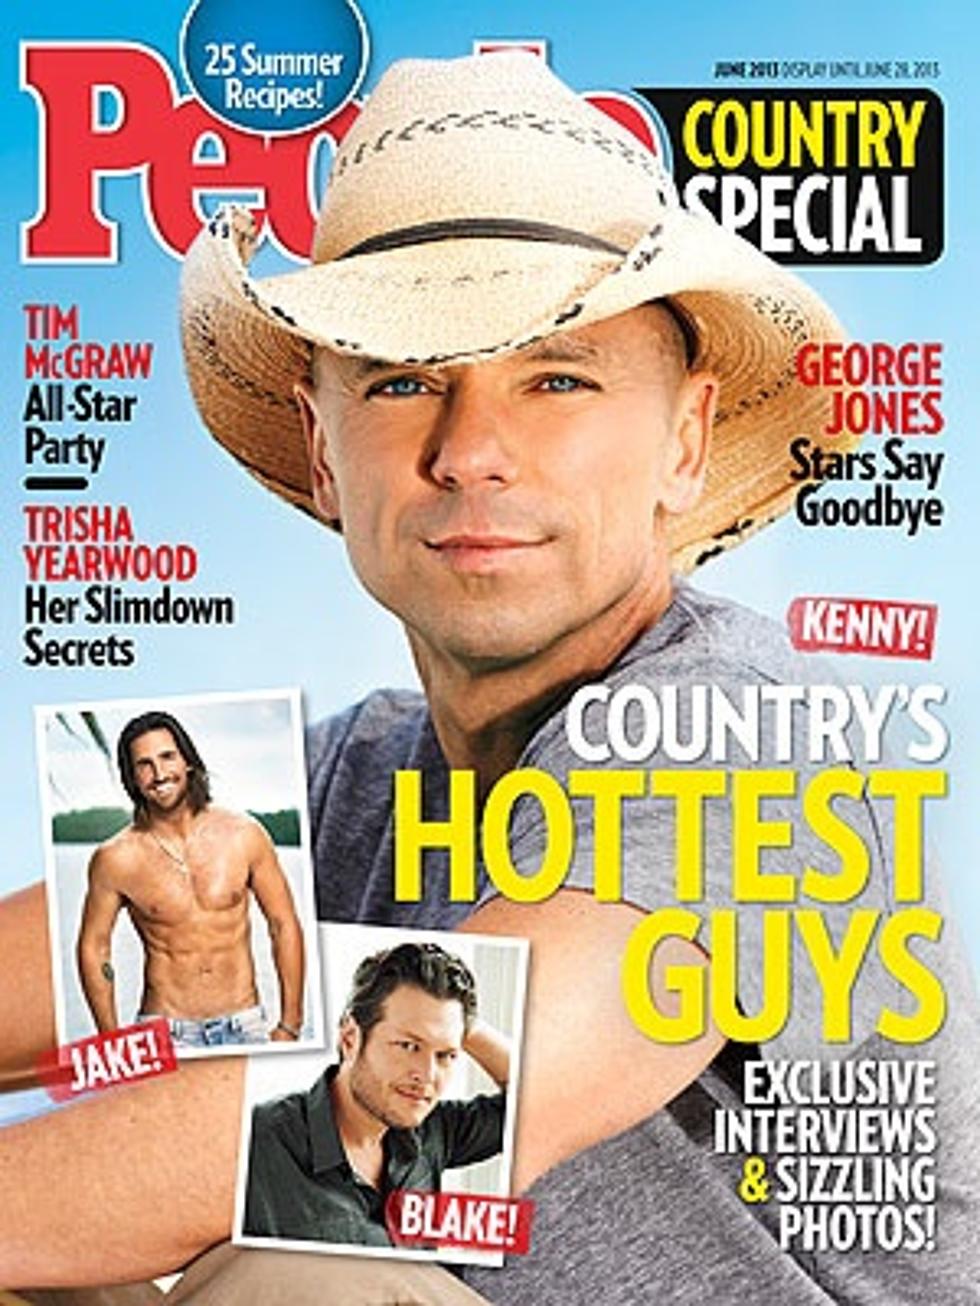 Kenny Chesney Named Hottest Guy of 2013 by People Country